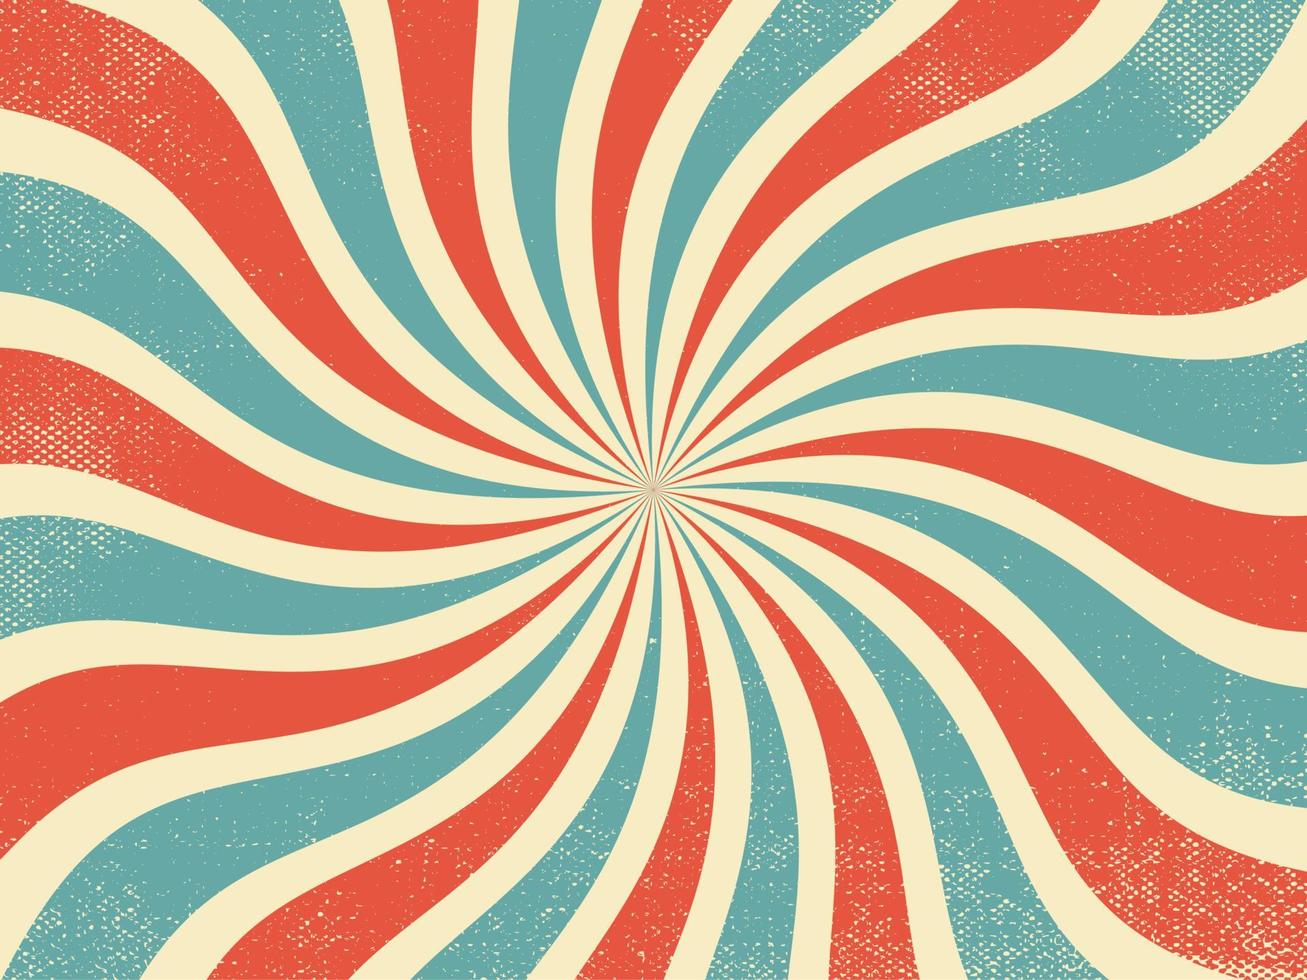 Vintage red and blue rays retro burst background vector